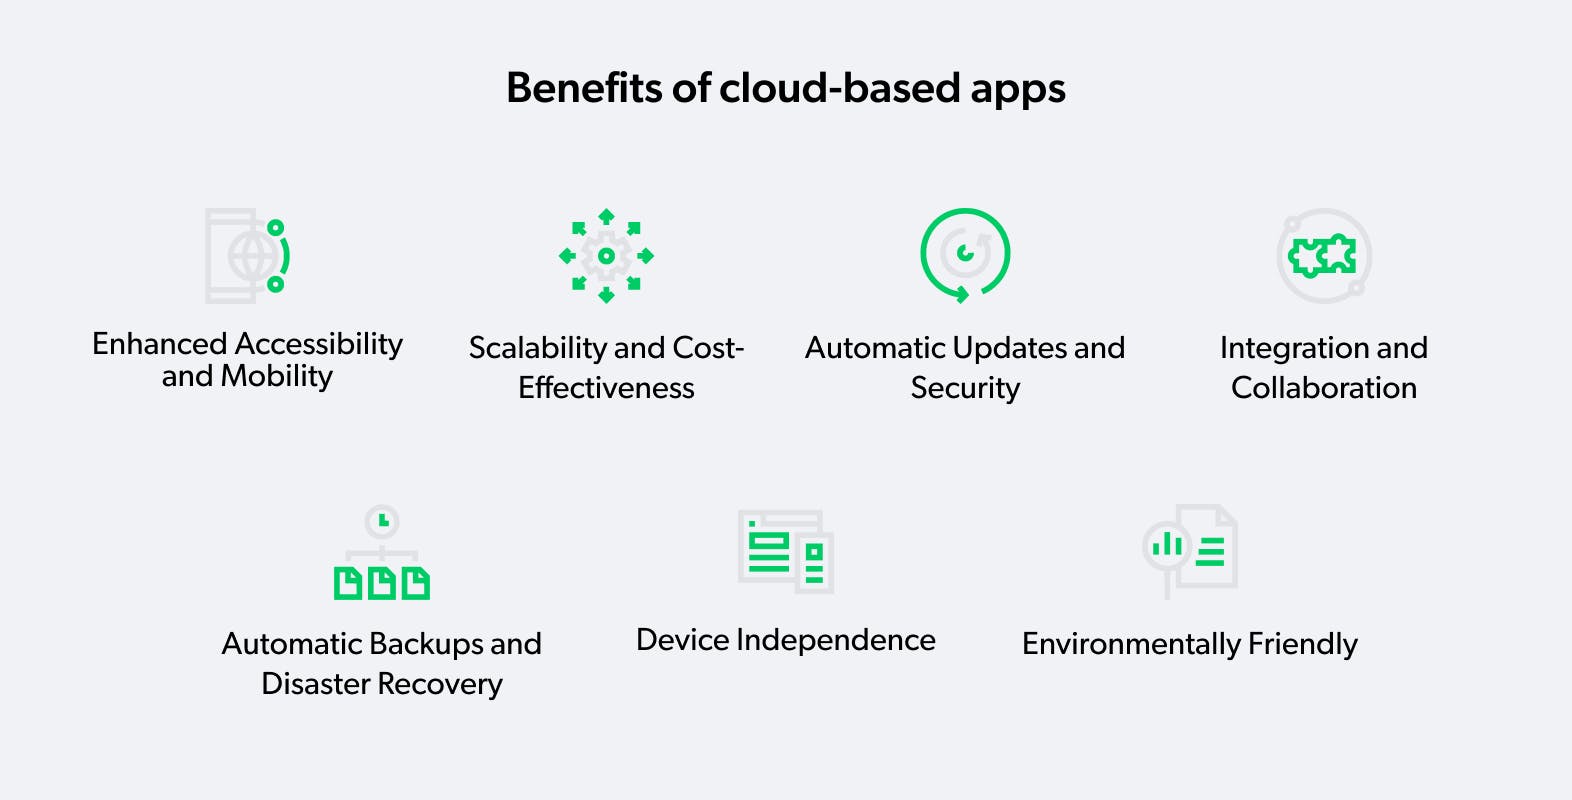 Benefits of cloud-based apps